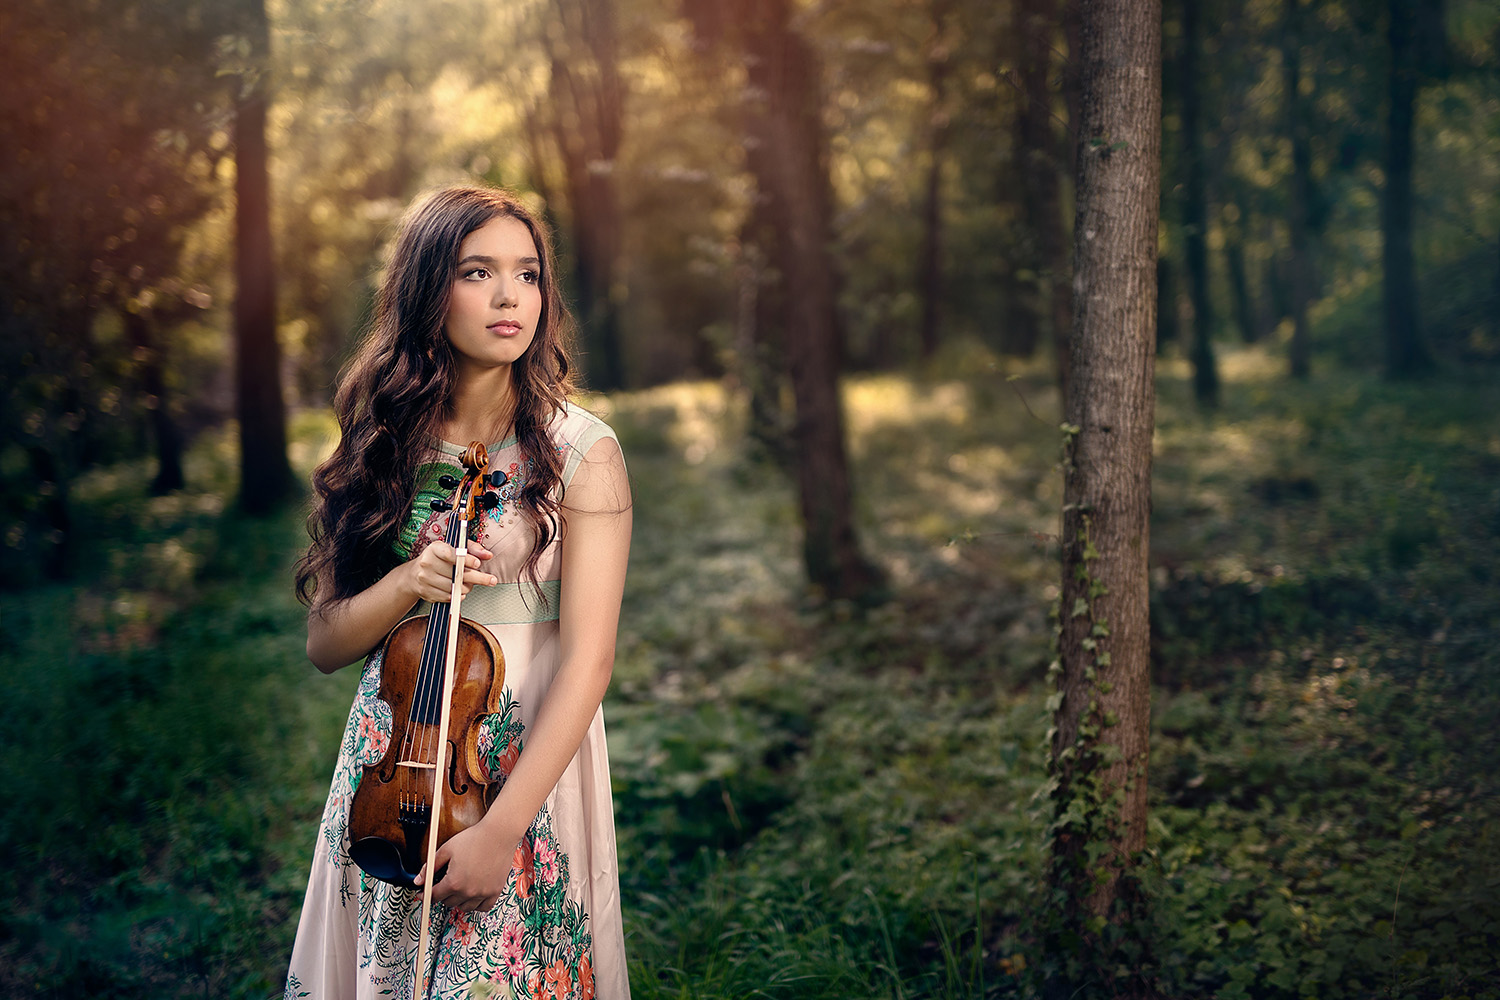 A woman standing in a forest and holding a violin